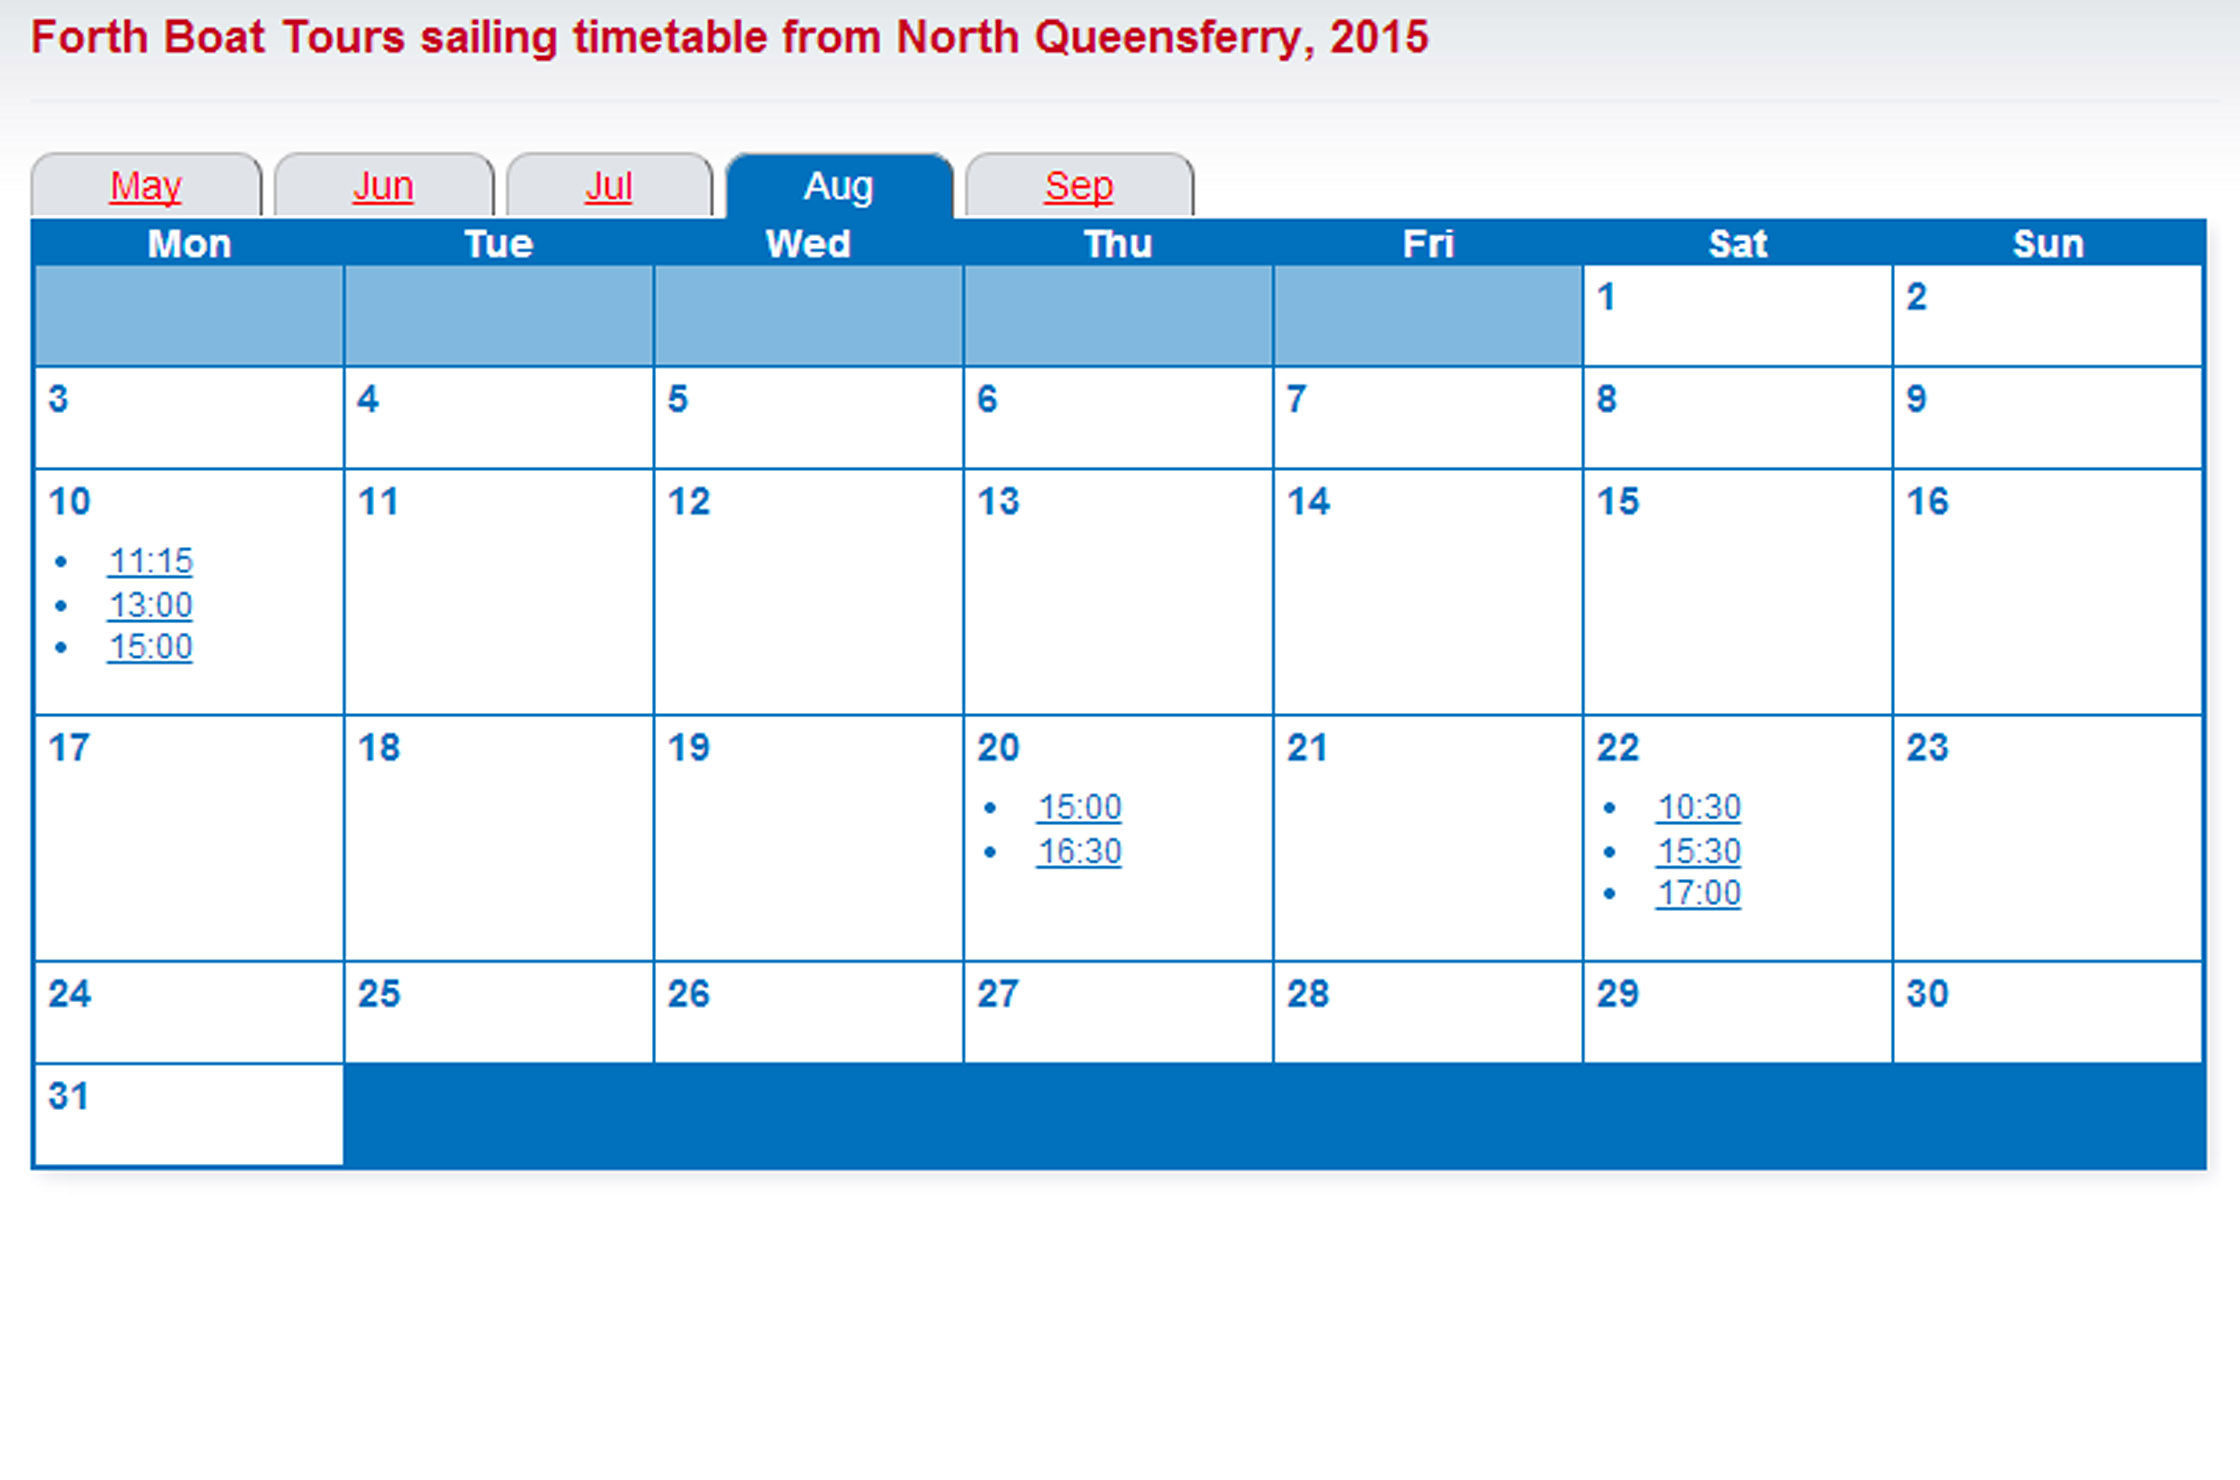 The North Queensferry timetable